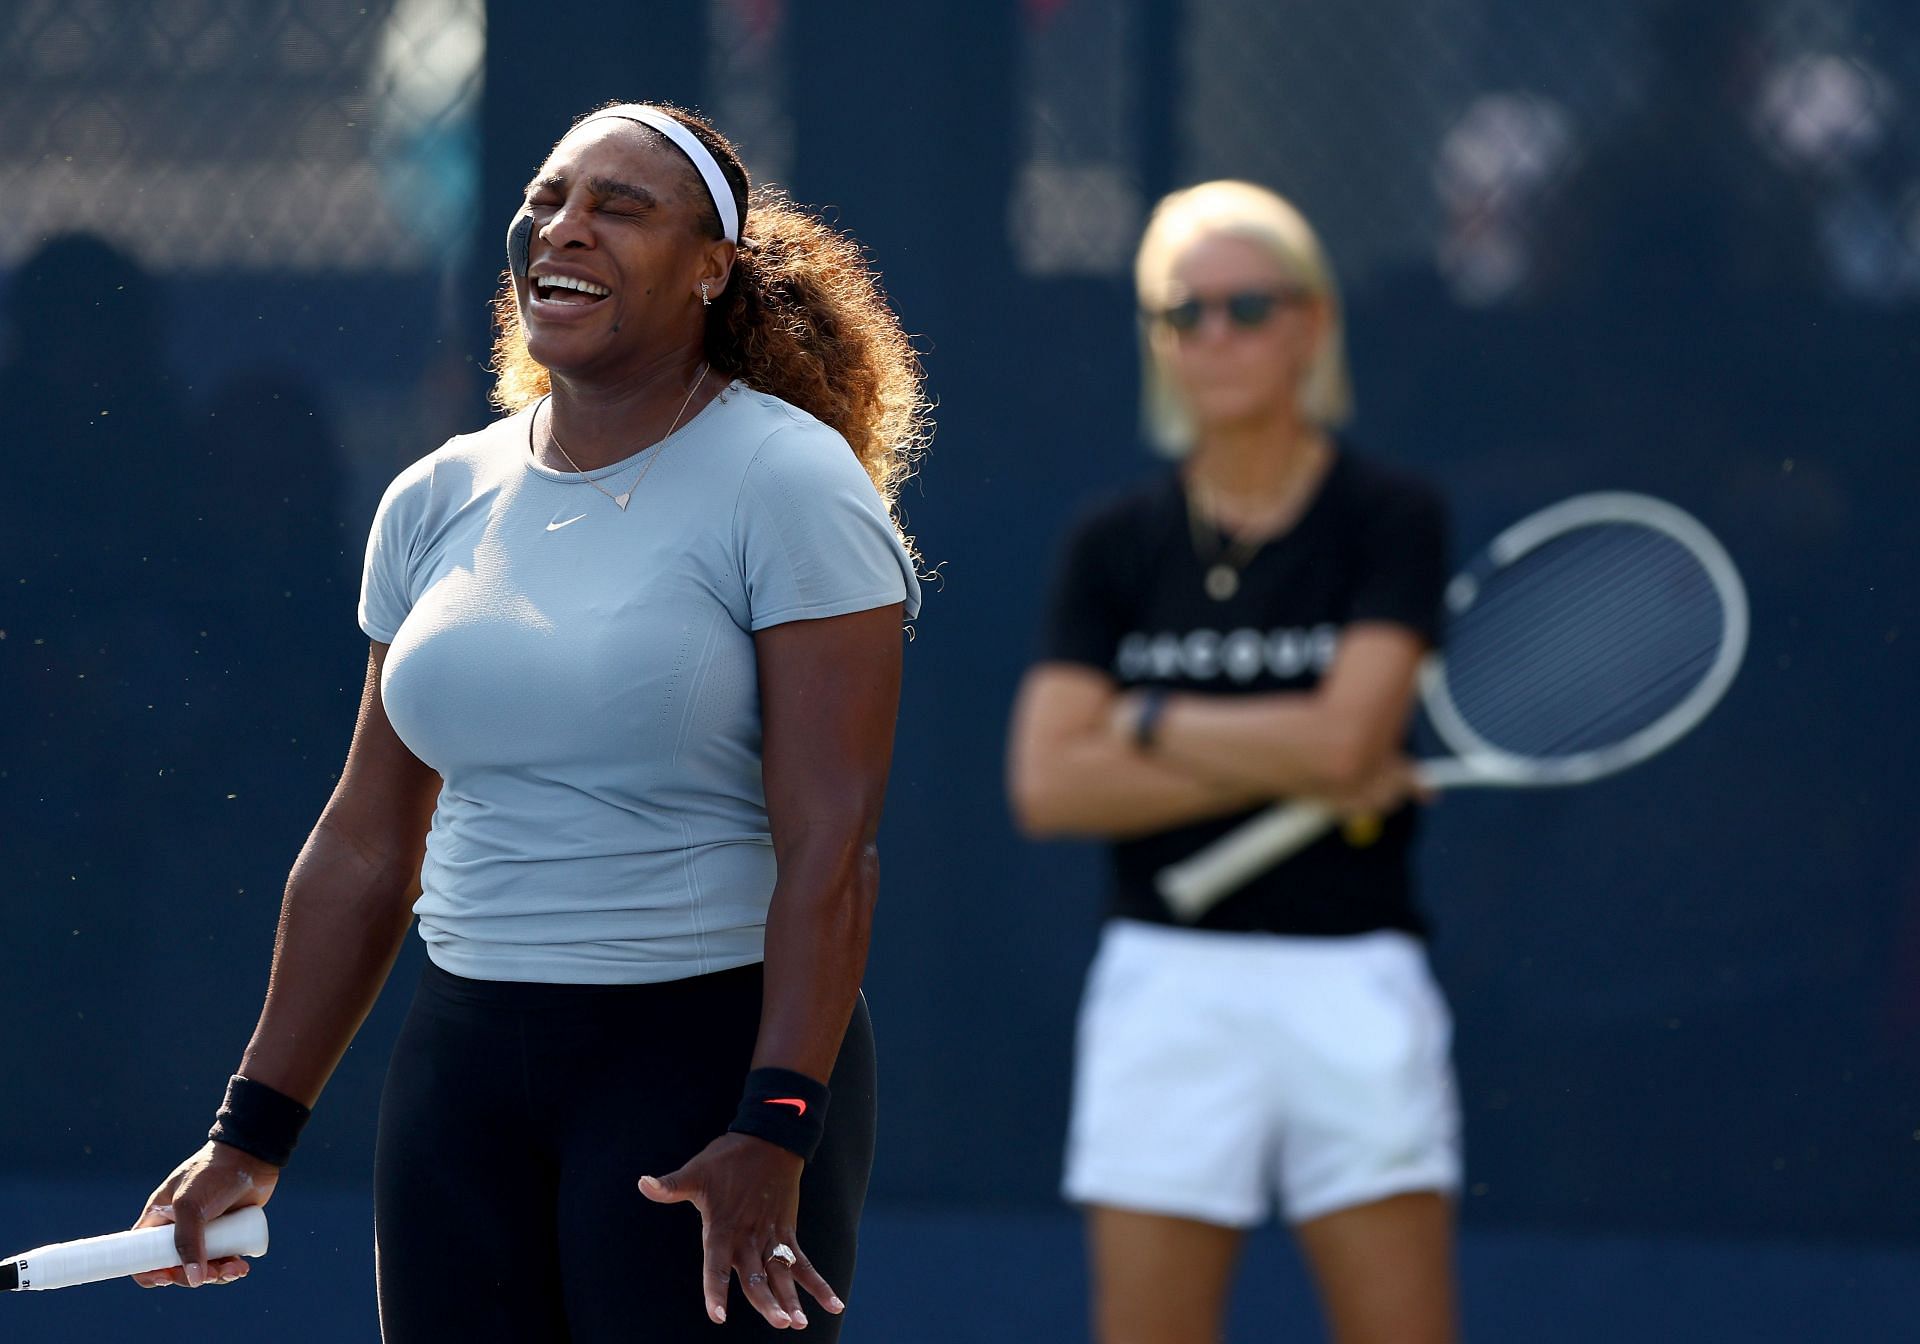 Serena Williams and Rennae Stubbs (in the background) at the 2022 US Open Previews